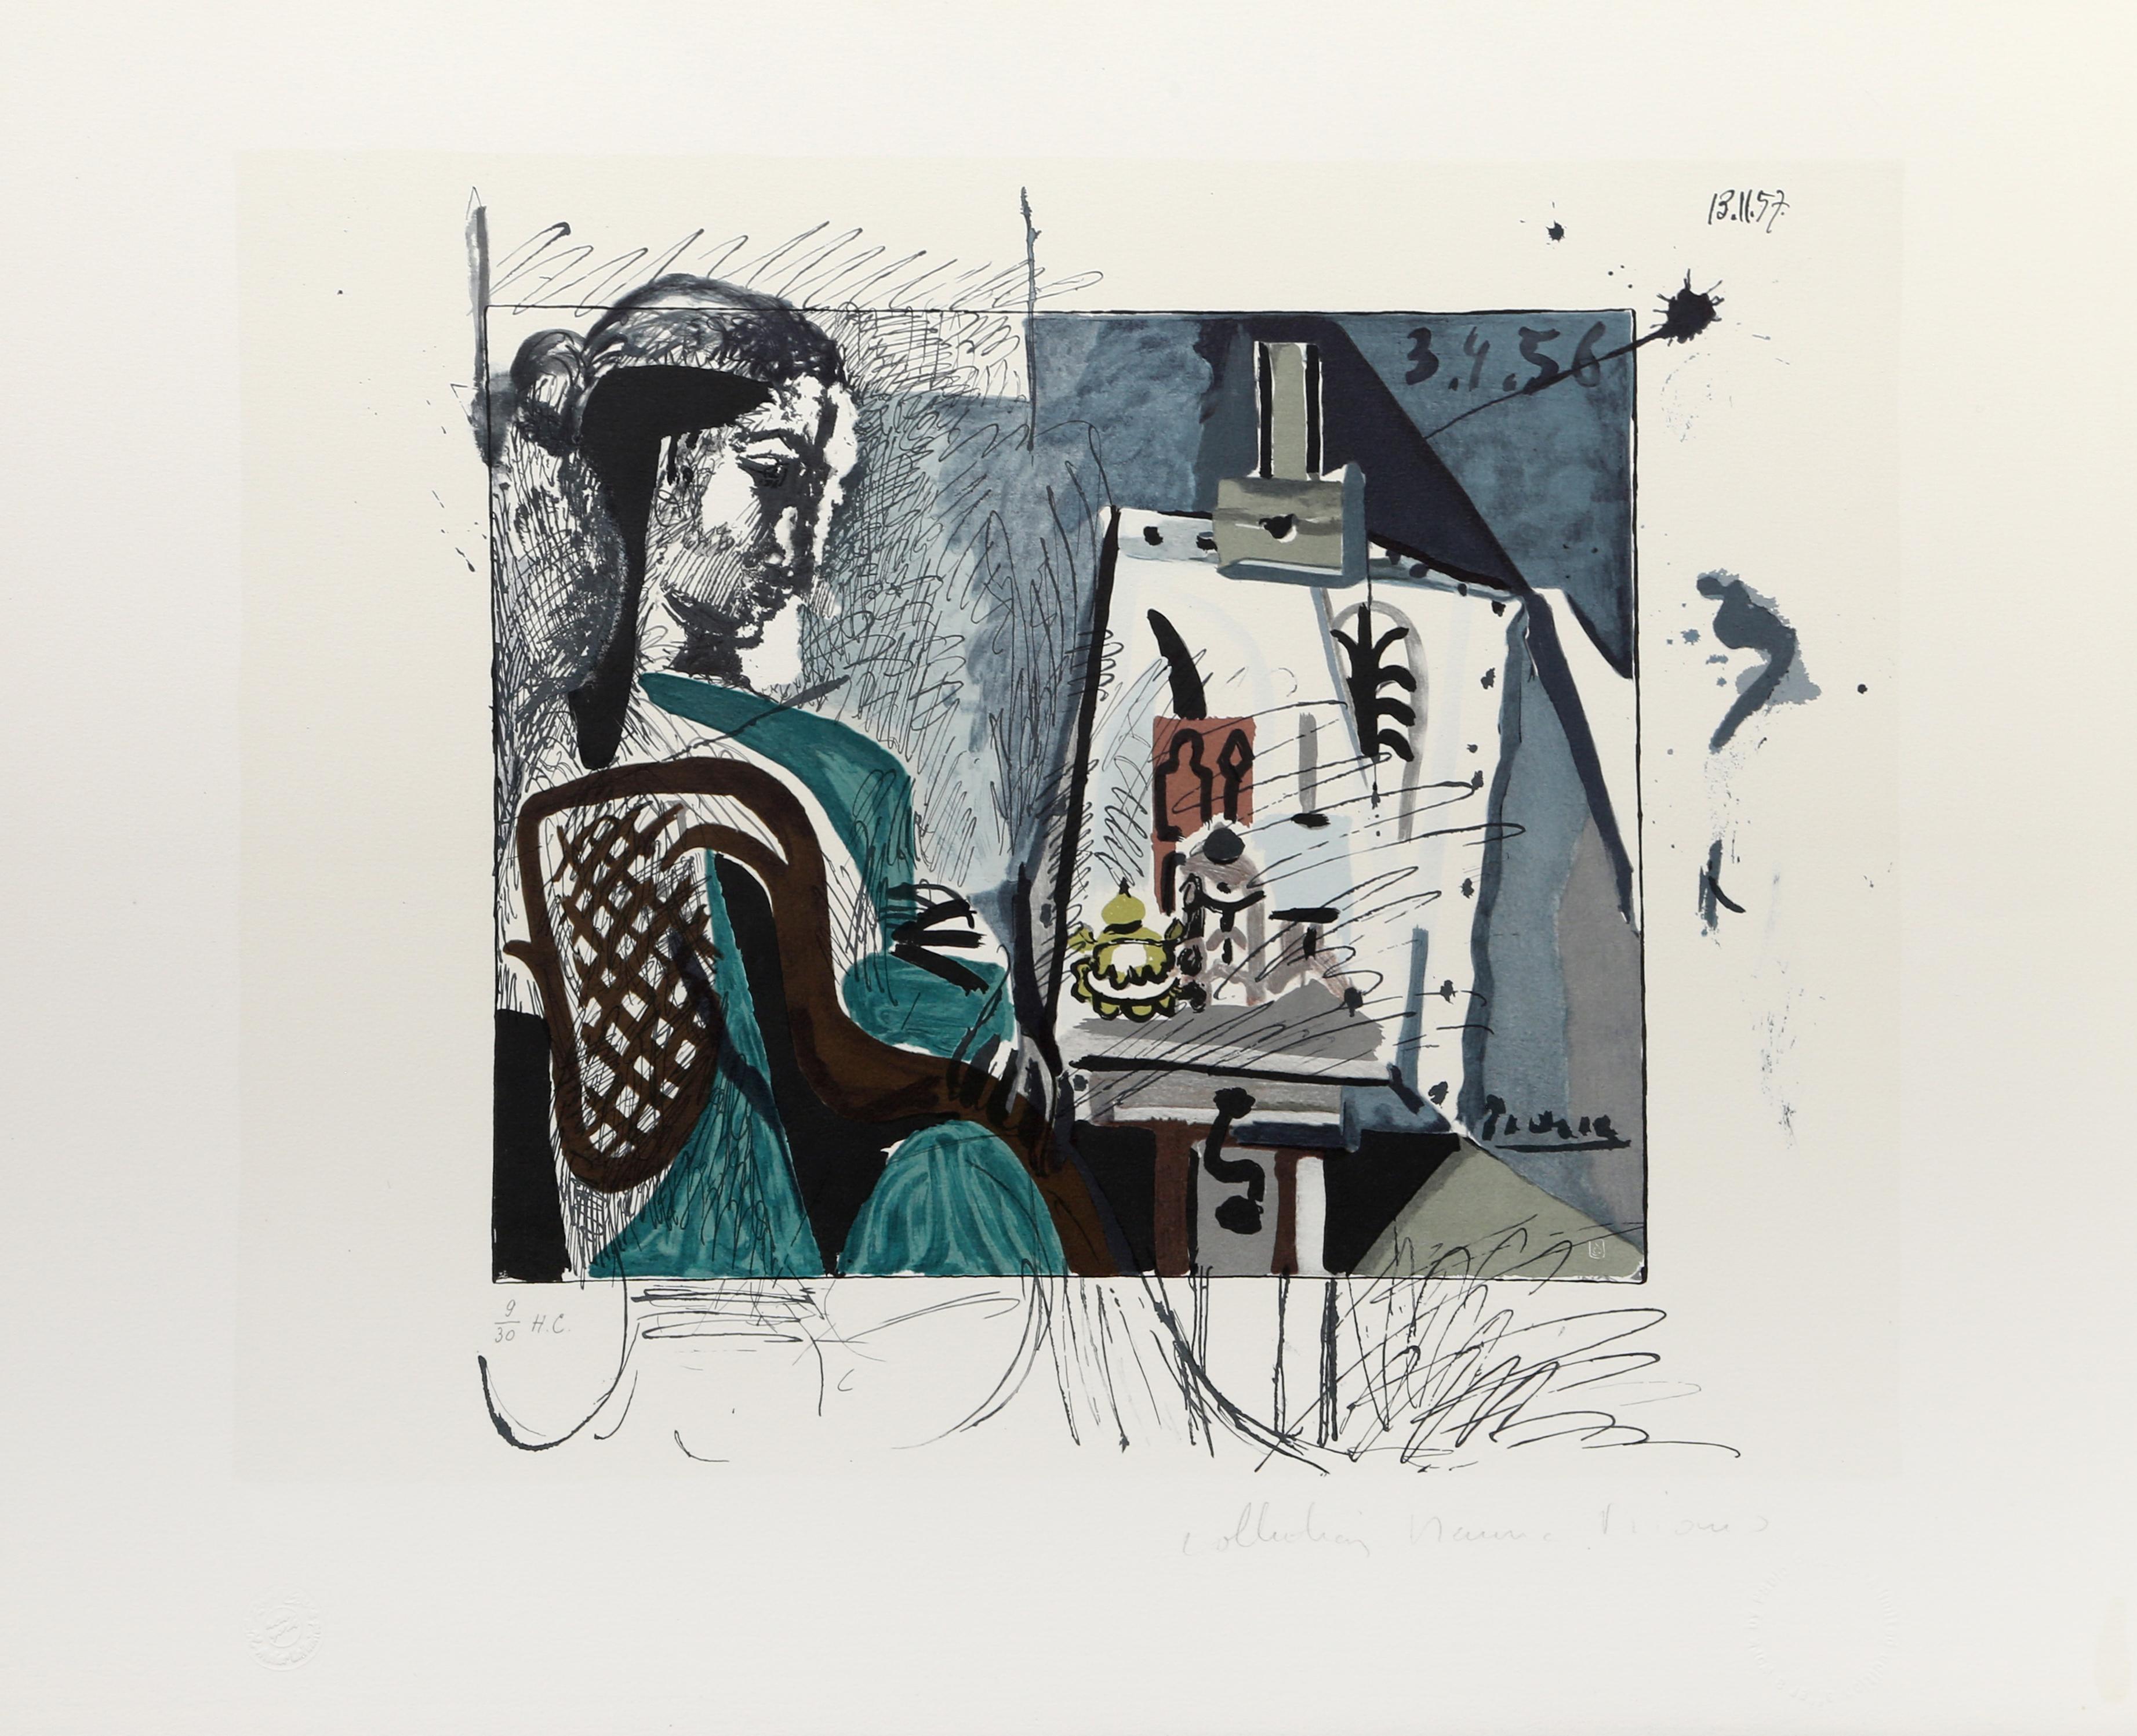 Rendered in hues of blue and grey, this portayal of a woman in an artist's workshop includes a depiction of an easel with a canvas facing the woman. Pablo Picasso's Cubist technique forgoes traditional perspective to integrate multiple views